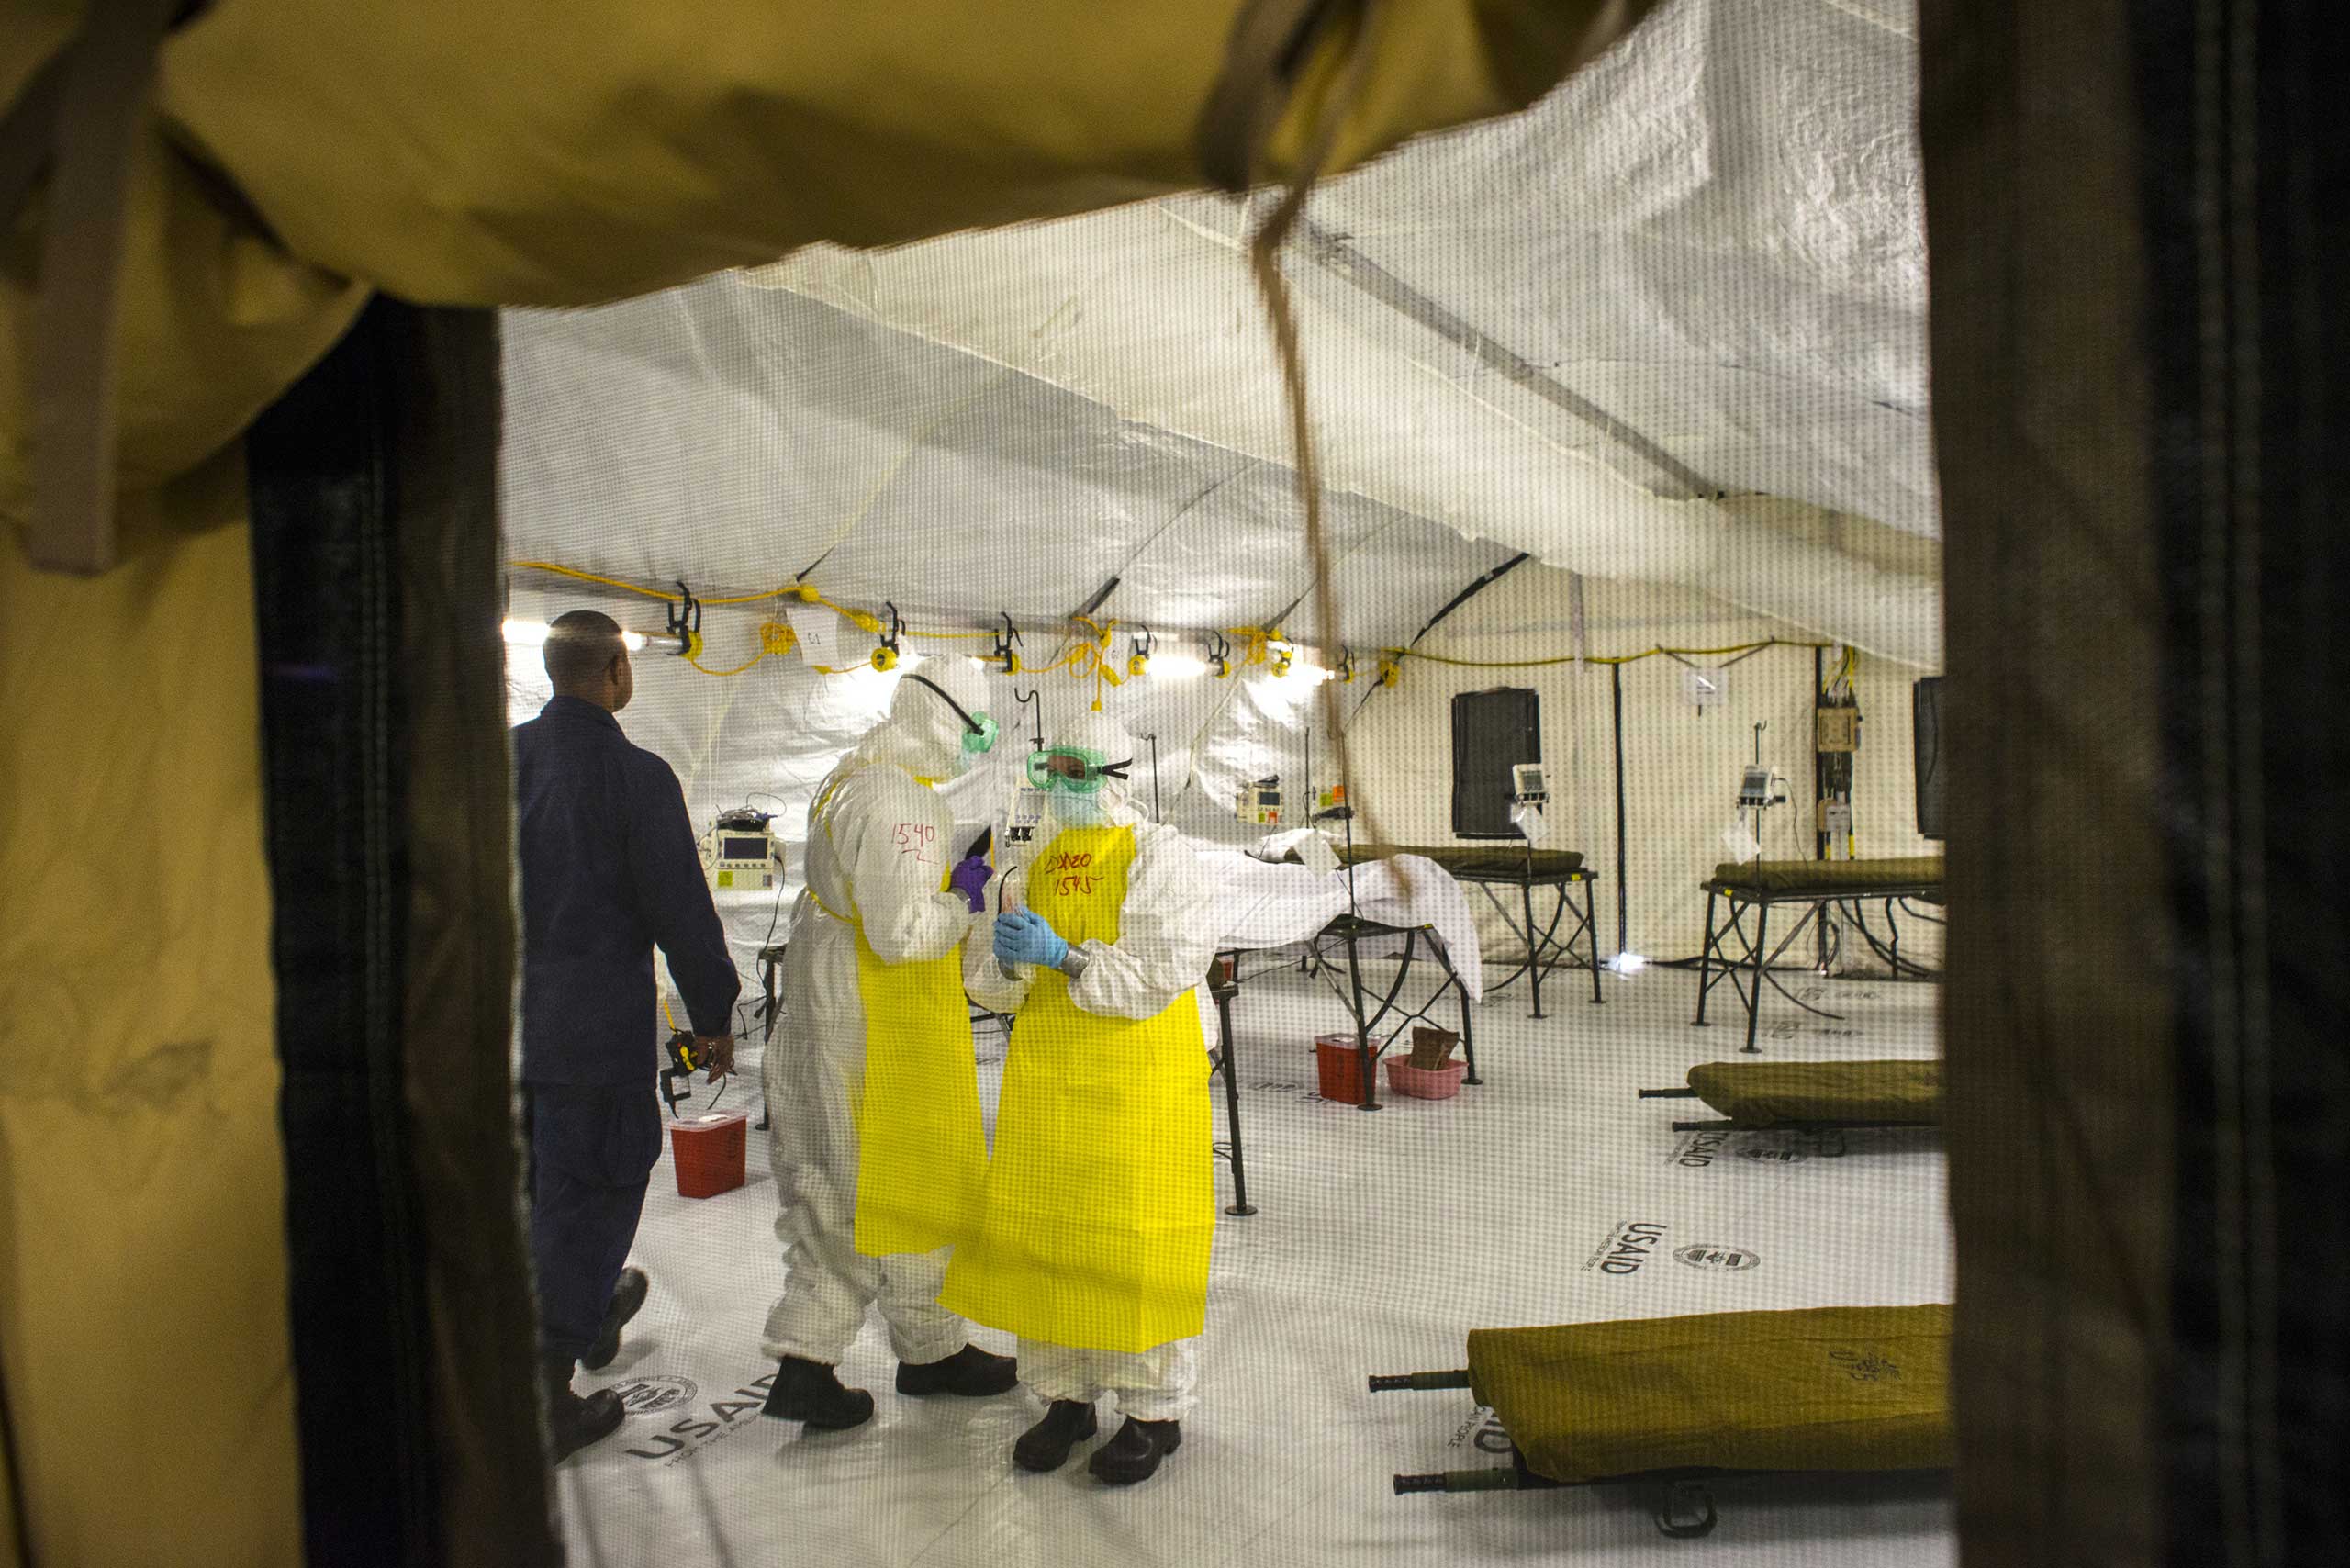 Medical staff simulate treating an Ebola patient inside the Monrovia Medical Unit on Nov.4, 2014 in Monrovia, Liberia.